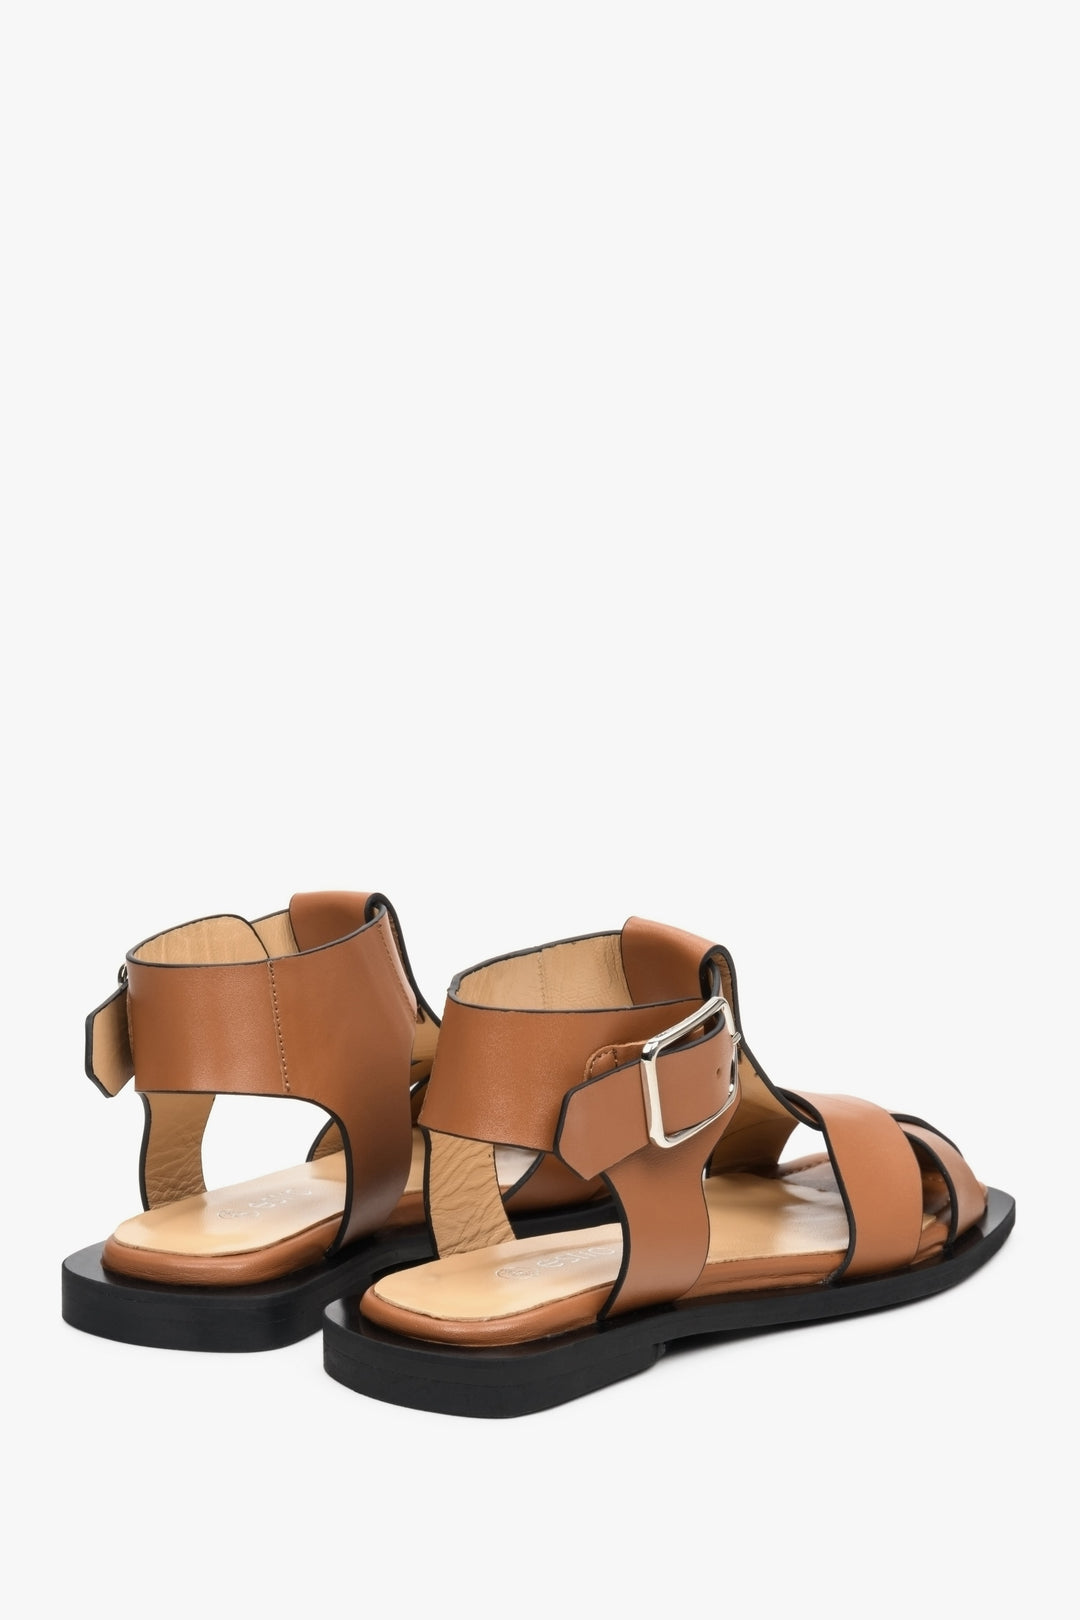 Women's natural leather sandals in brown color by Estro - presentation of the heel and side seam.